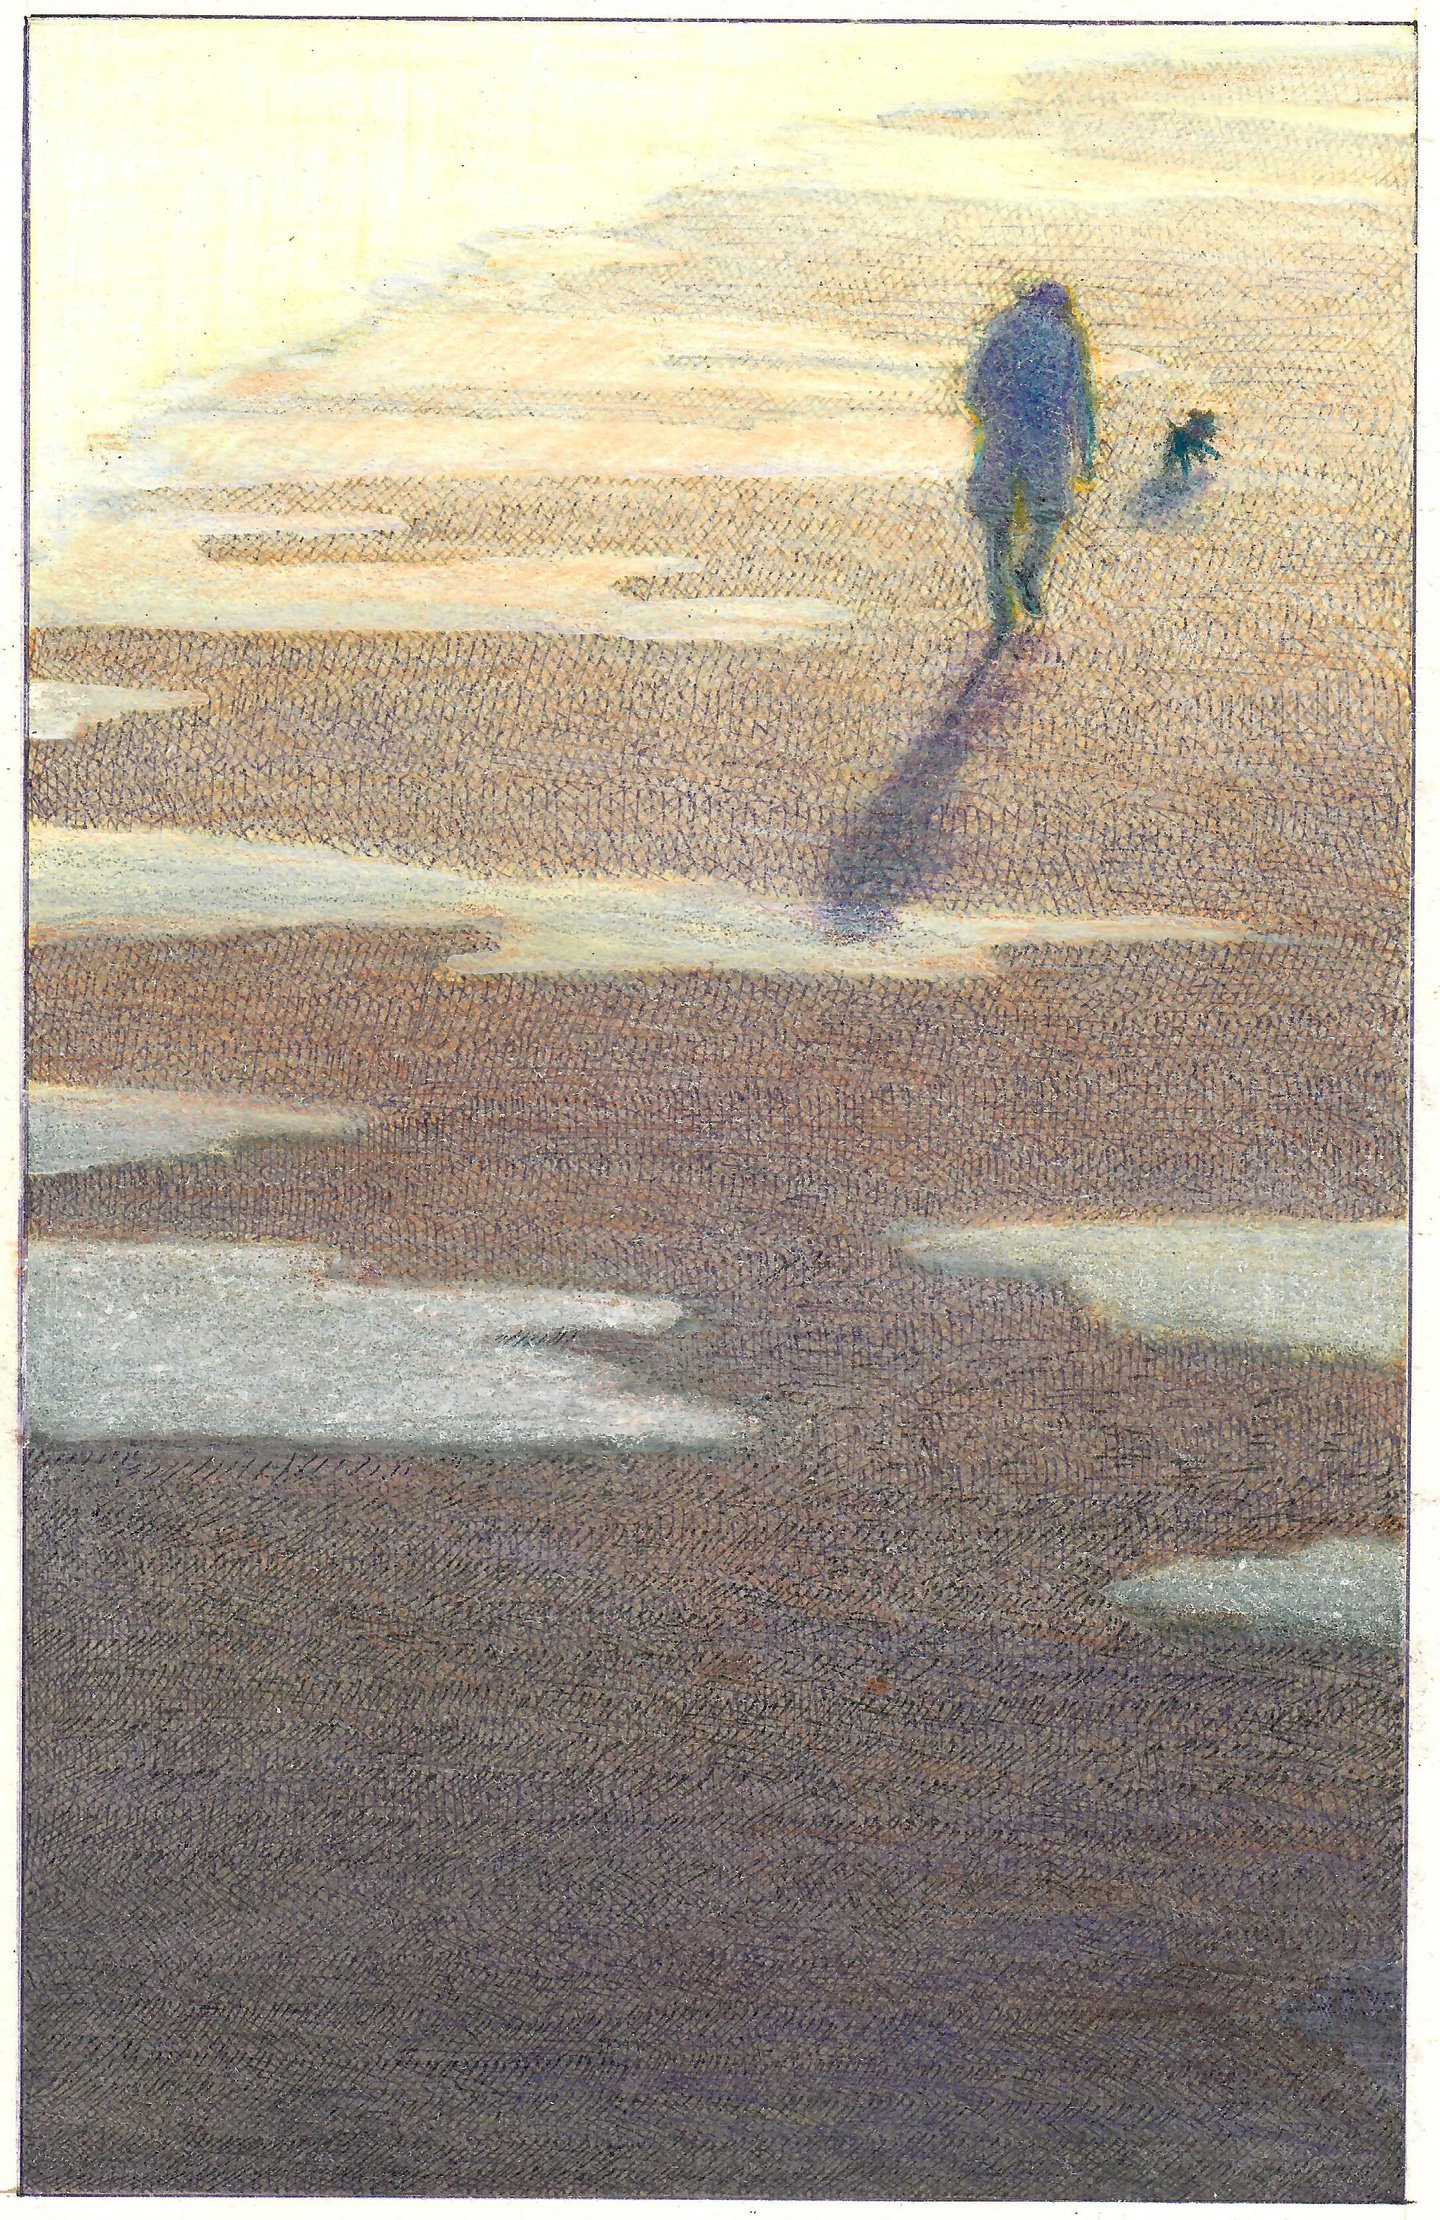 A person walking on (what appears to be) a beach with a dog. Water streaks across the ground in pools. The two figures are far away from us, moving into a distant bright light.